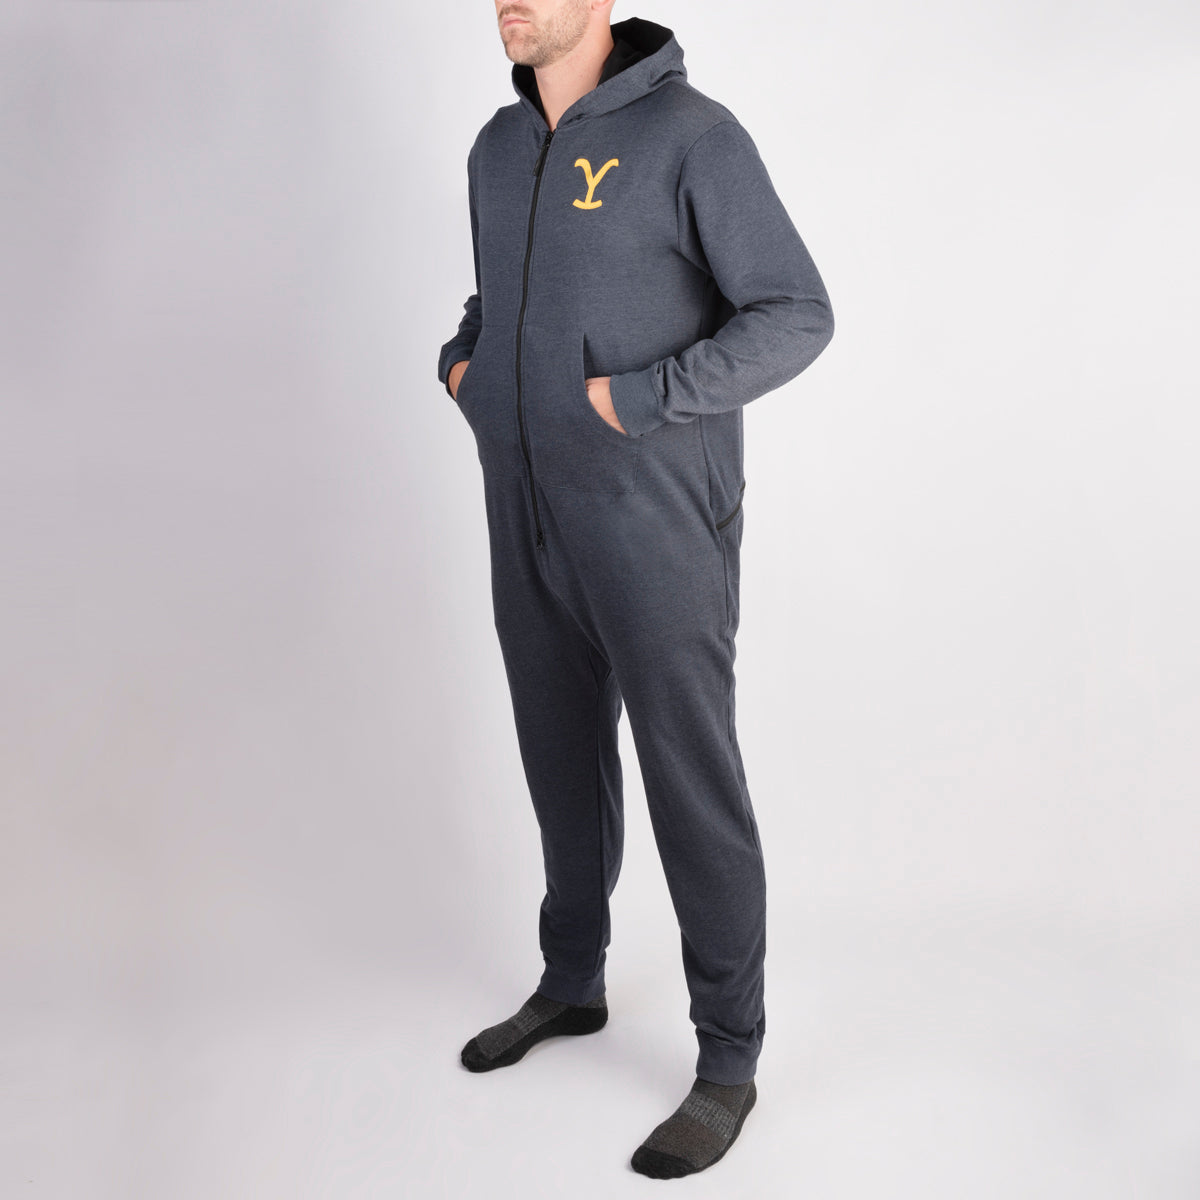 Yellowstone Y Logo Basecamp Embroidered Onesie